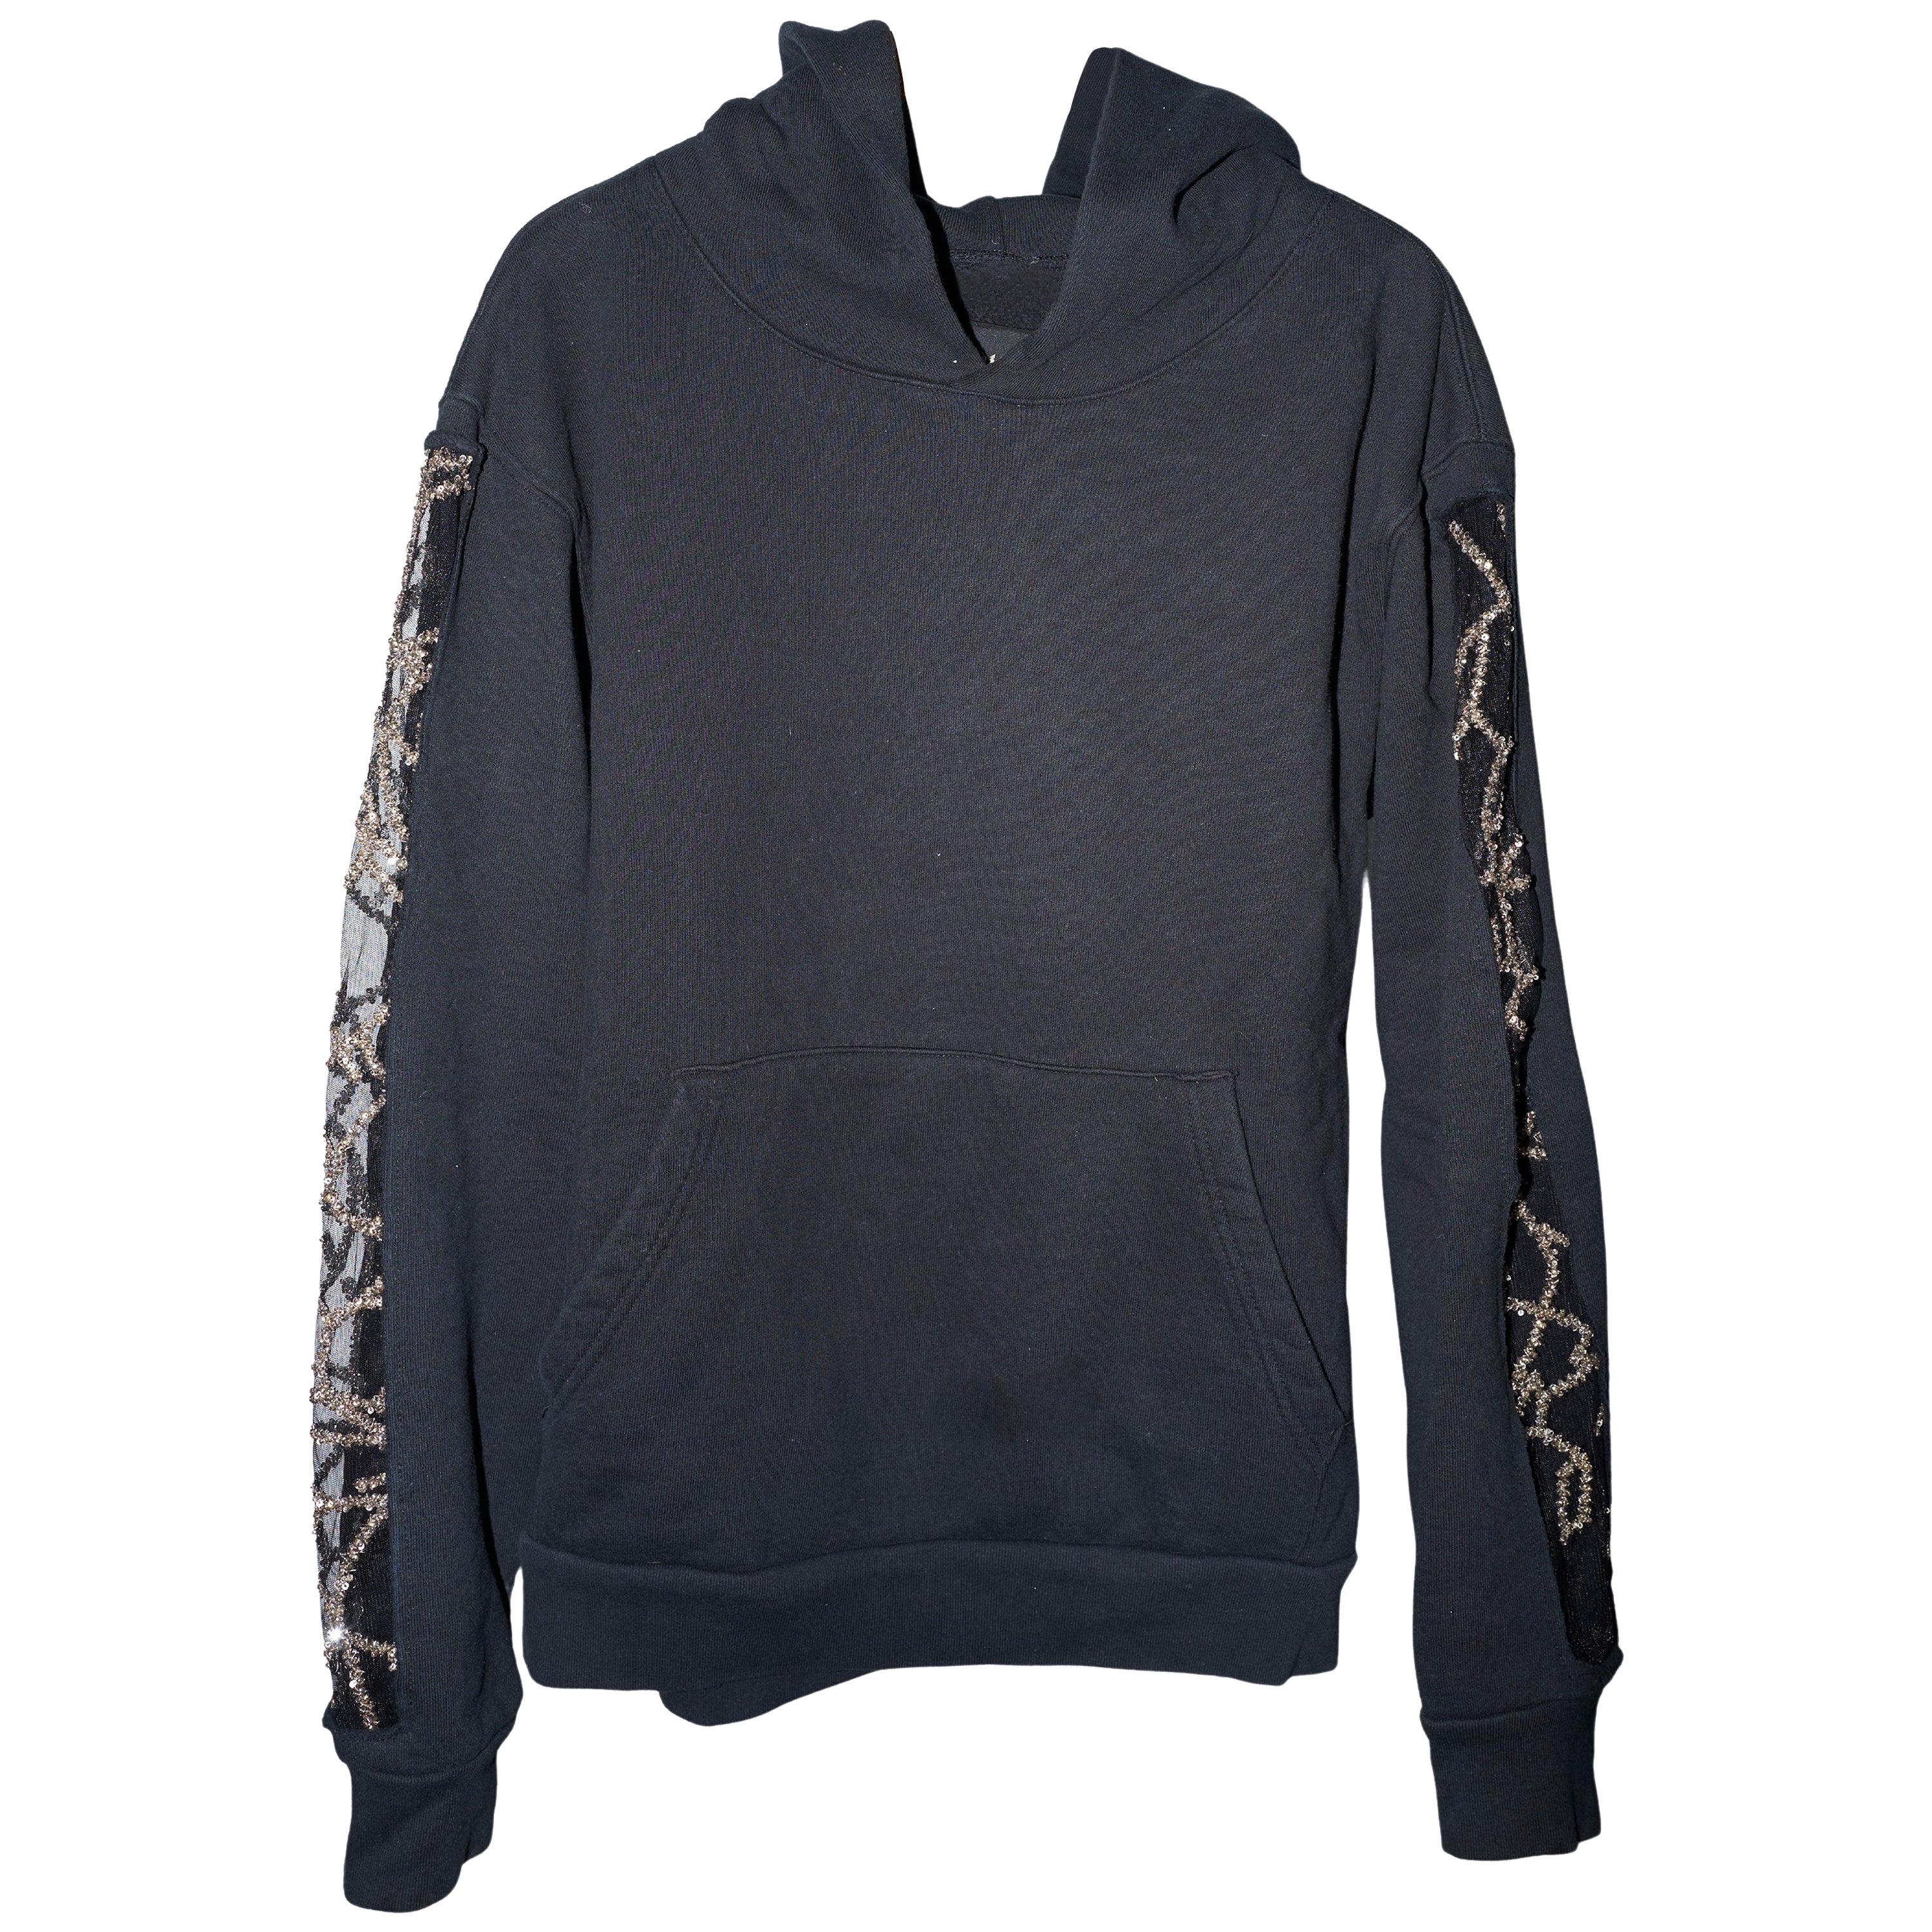 Brand: J Dauphin
Black Hoodie Sweatshirt Embellished Sleeve
Material: 100% Organic Cotton 

Model wears same hoodie but in a different color

Available in Size Large

Express a hybrid of easy-luxe and bourgeoisie jet-set look. Effortless and